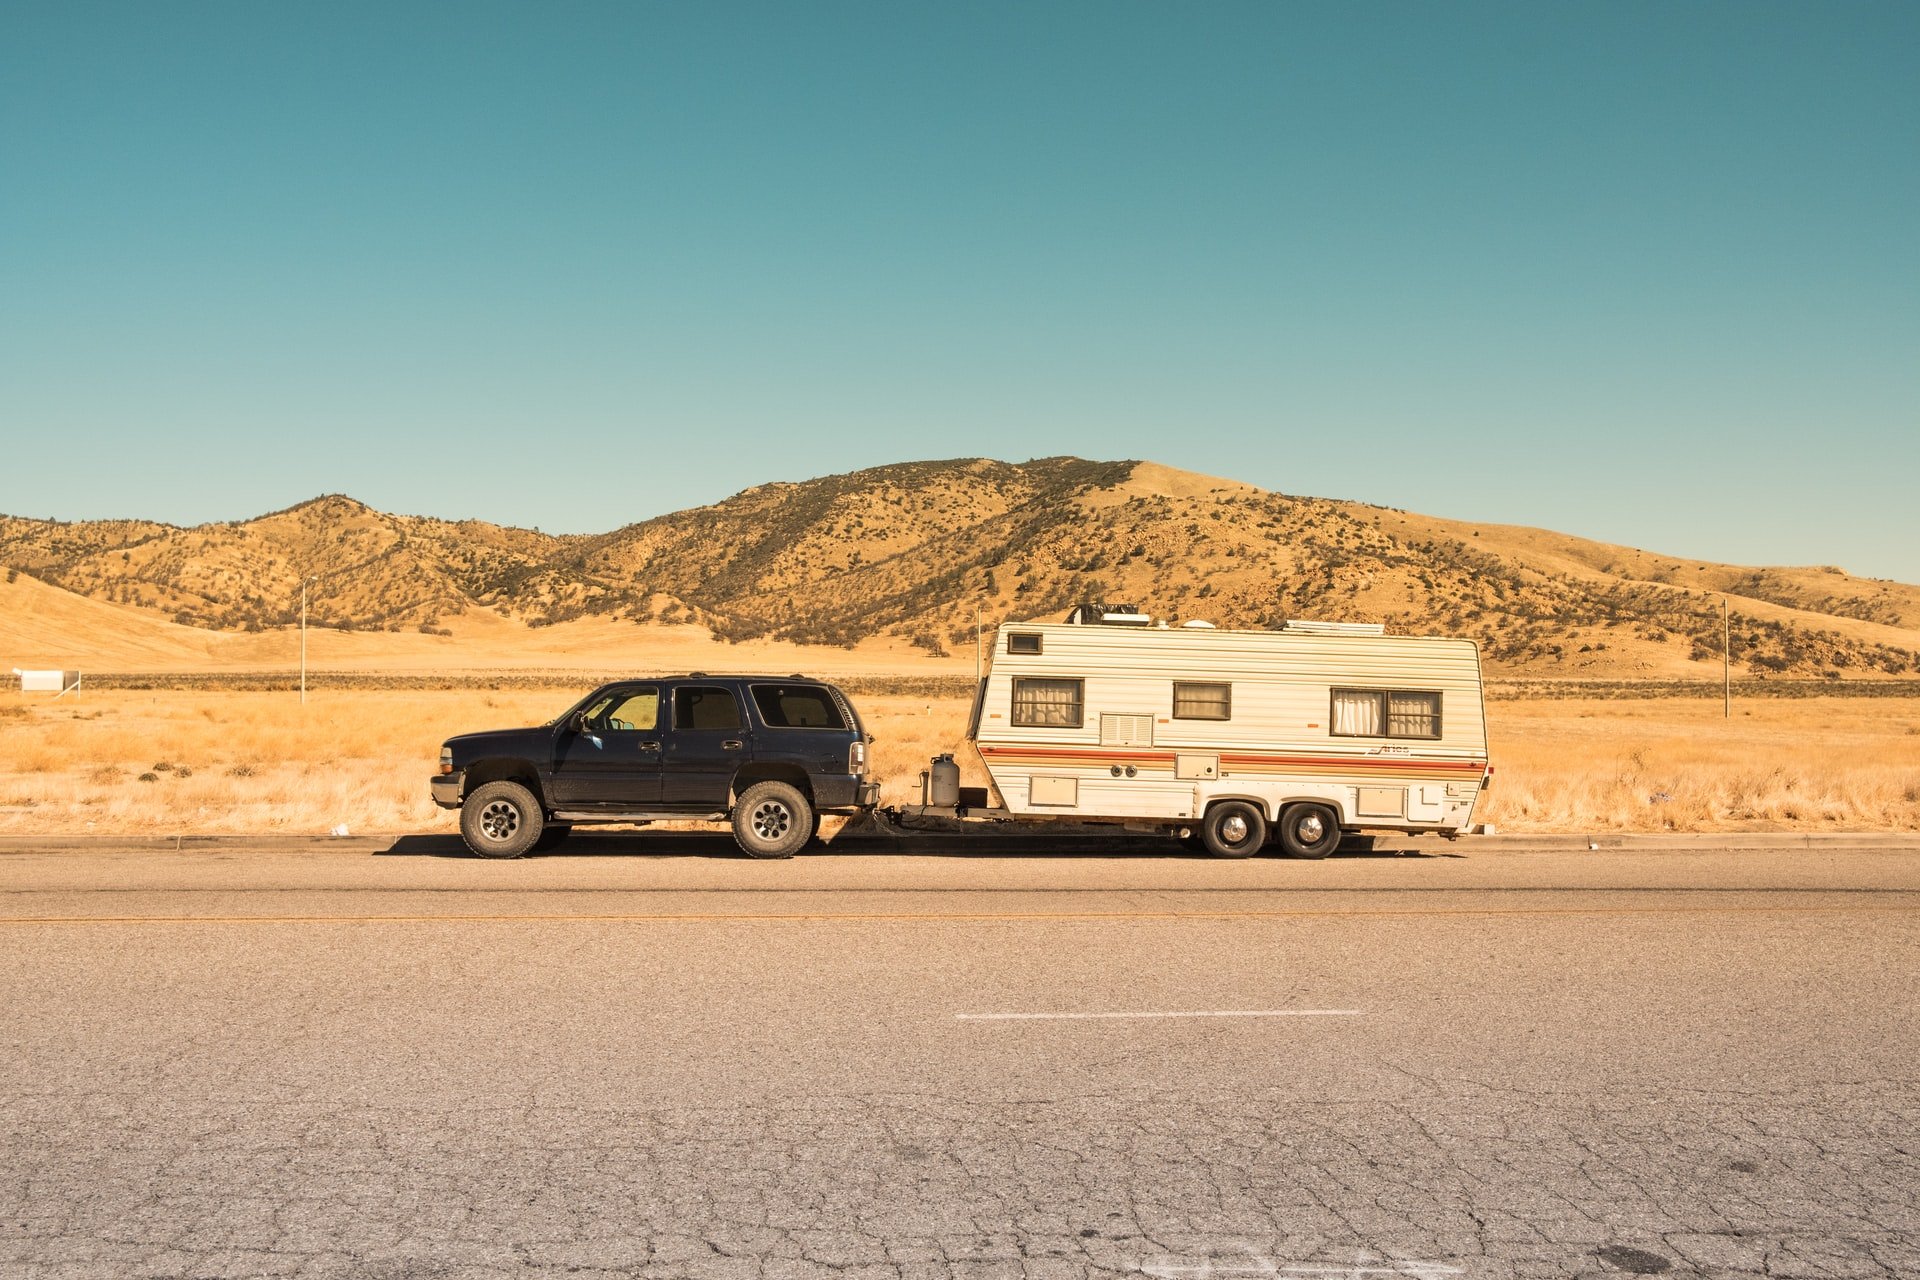 A camping trailer parked in a desert after burning through their RV trip budget